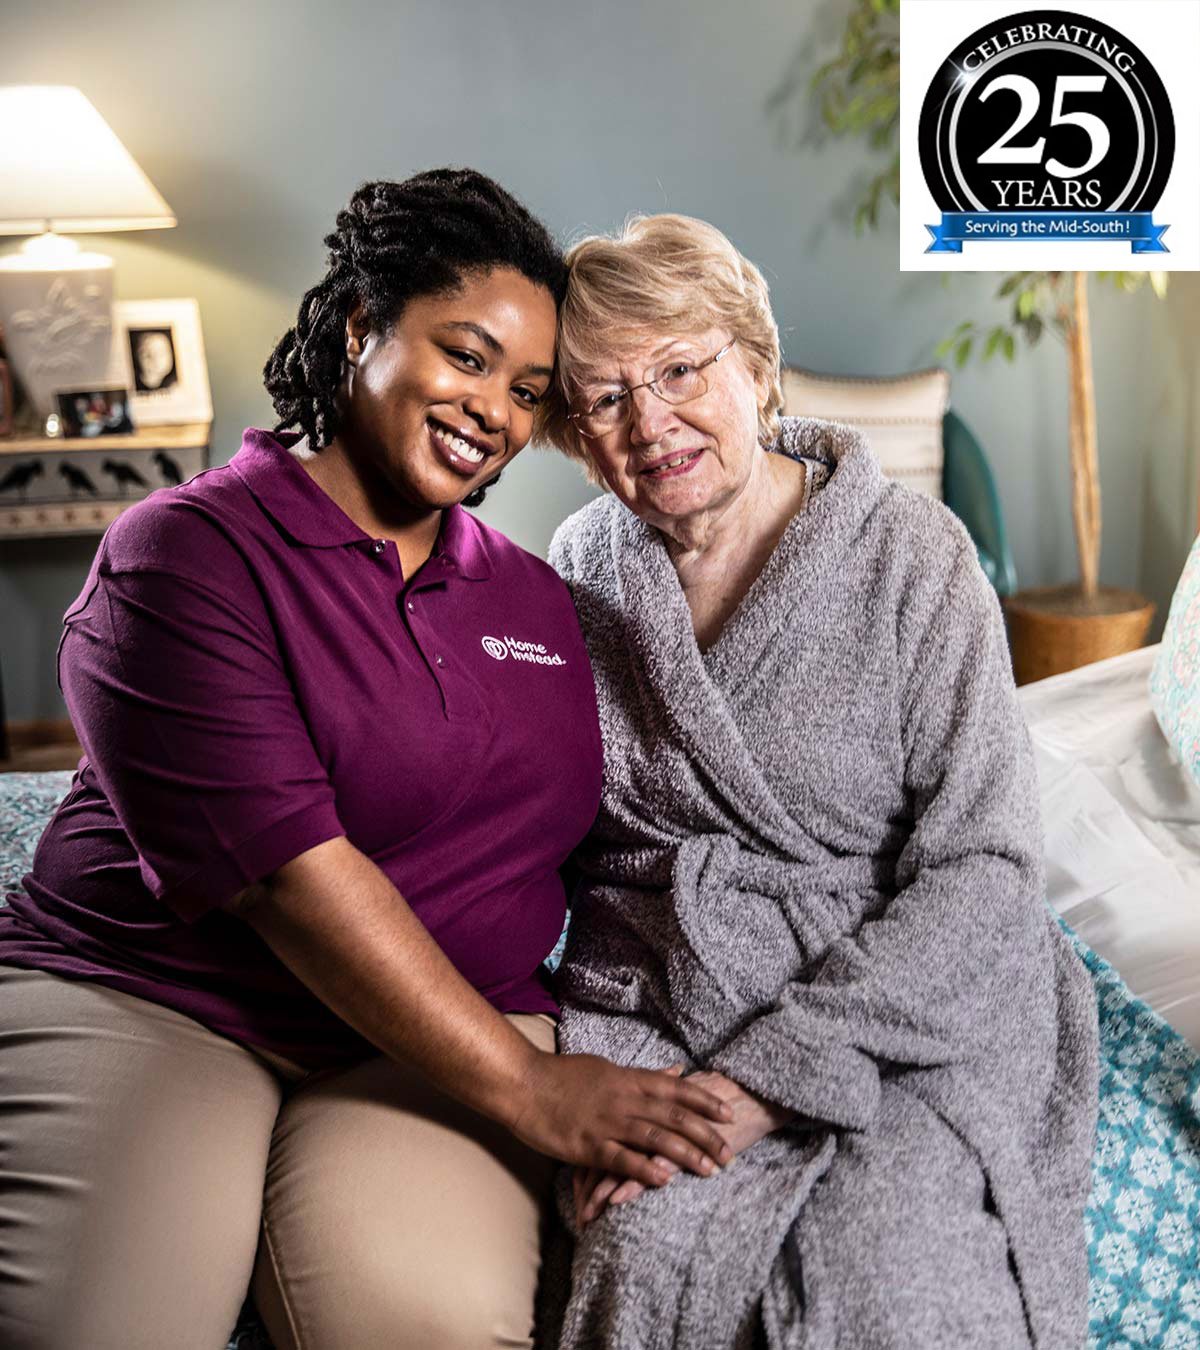 Home Instead CAREGiver and senior sitting on bed smiling with 25 year logo